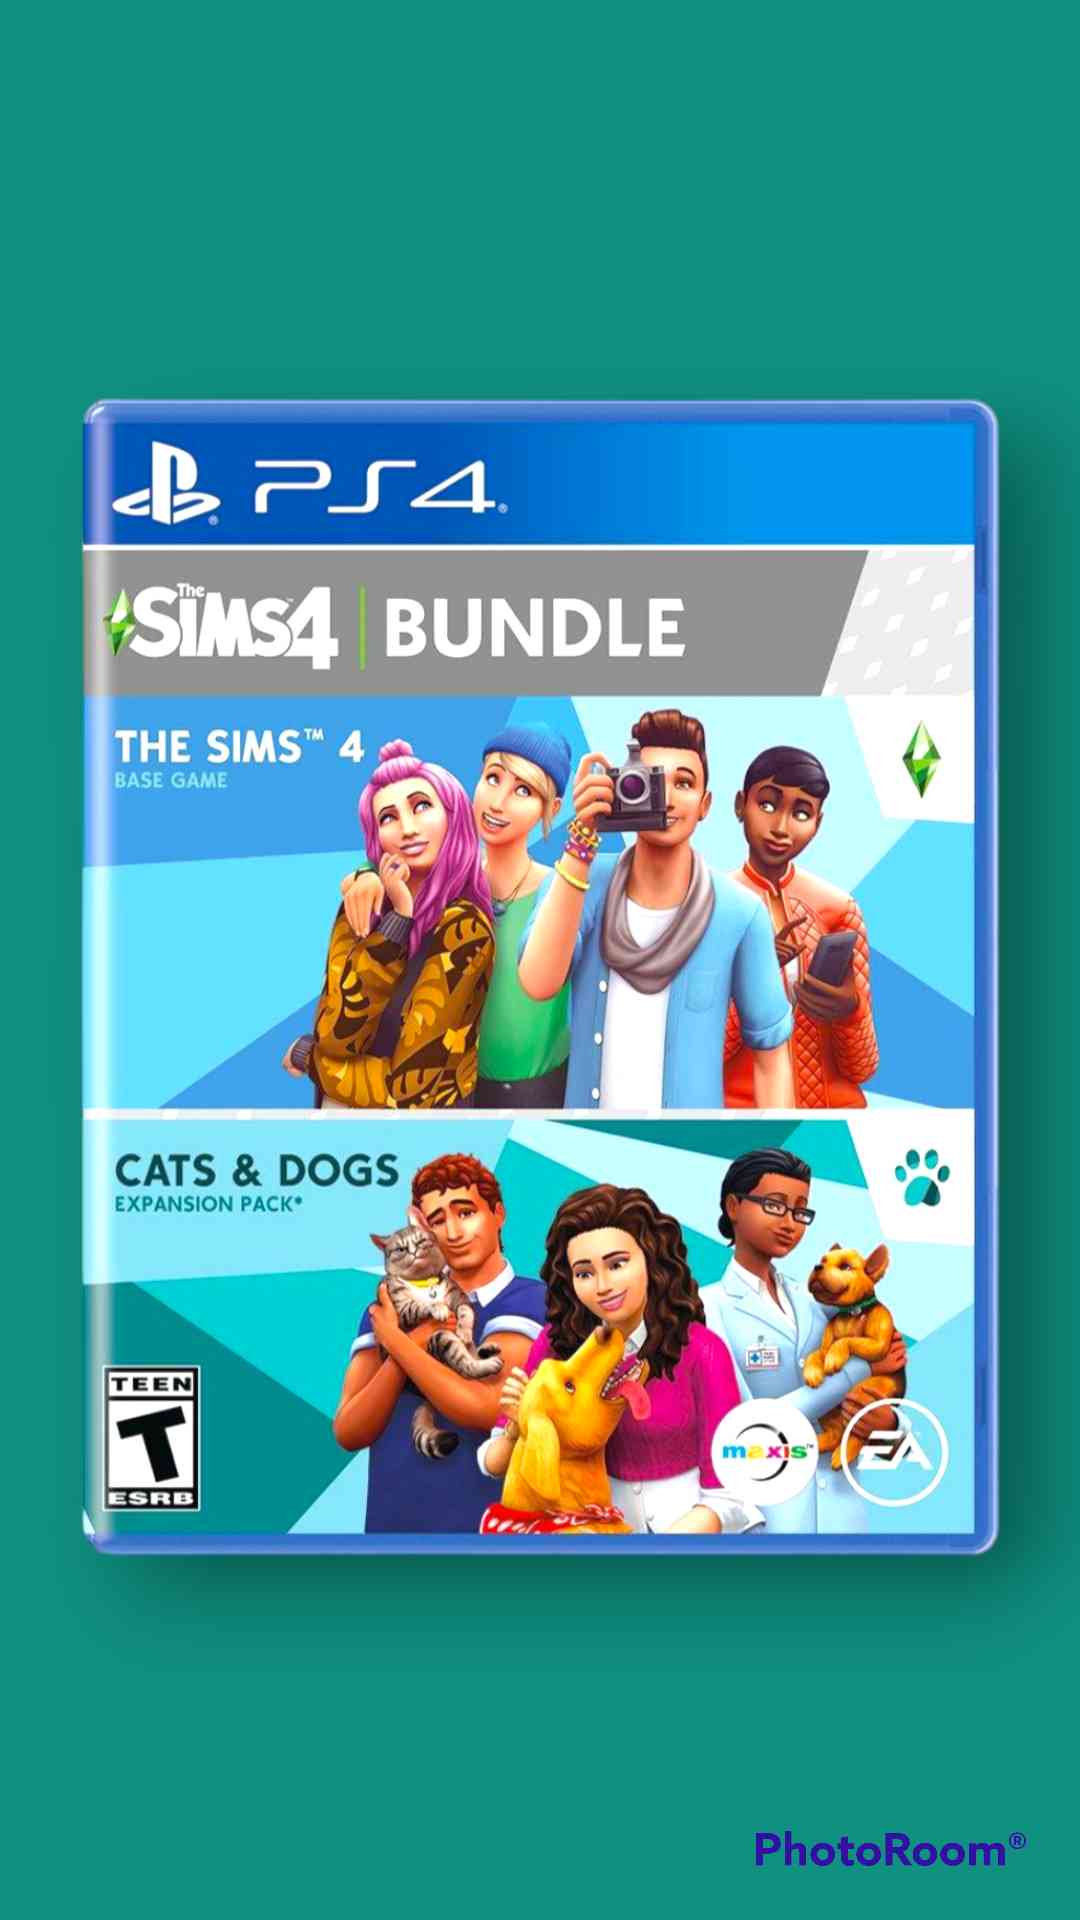 THE SIMS 4 PLUS CATS DOGS BUNDLE REFRESH PS4